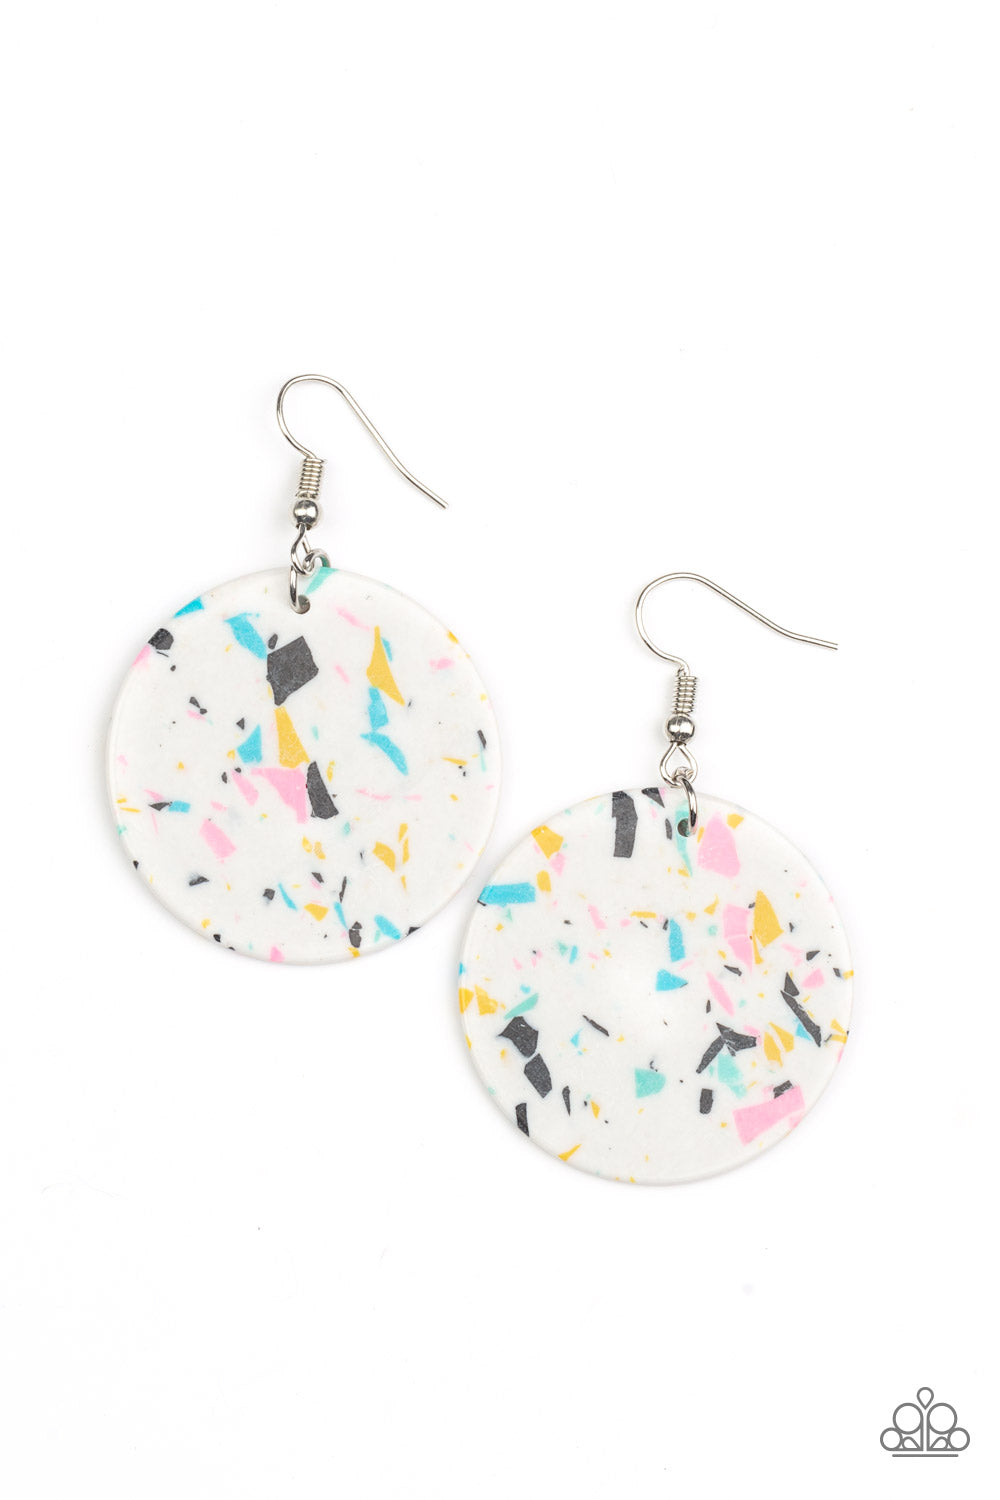 Tenaciously Terrazzo White Earring - Paparazzi Accessories  Featuring a colorful terrazzo finish, a faux white stone disc swings from the ear for a modern look. Earring attaches to a standard fishhook fitting.  Sold as one pair of earrings.